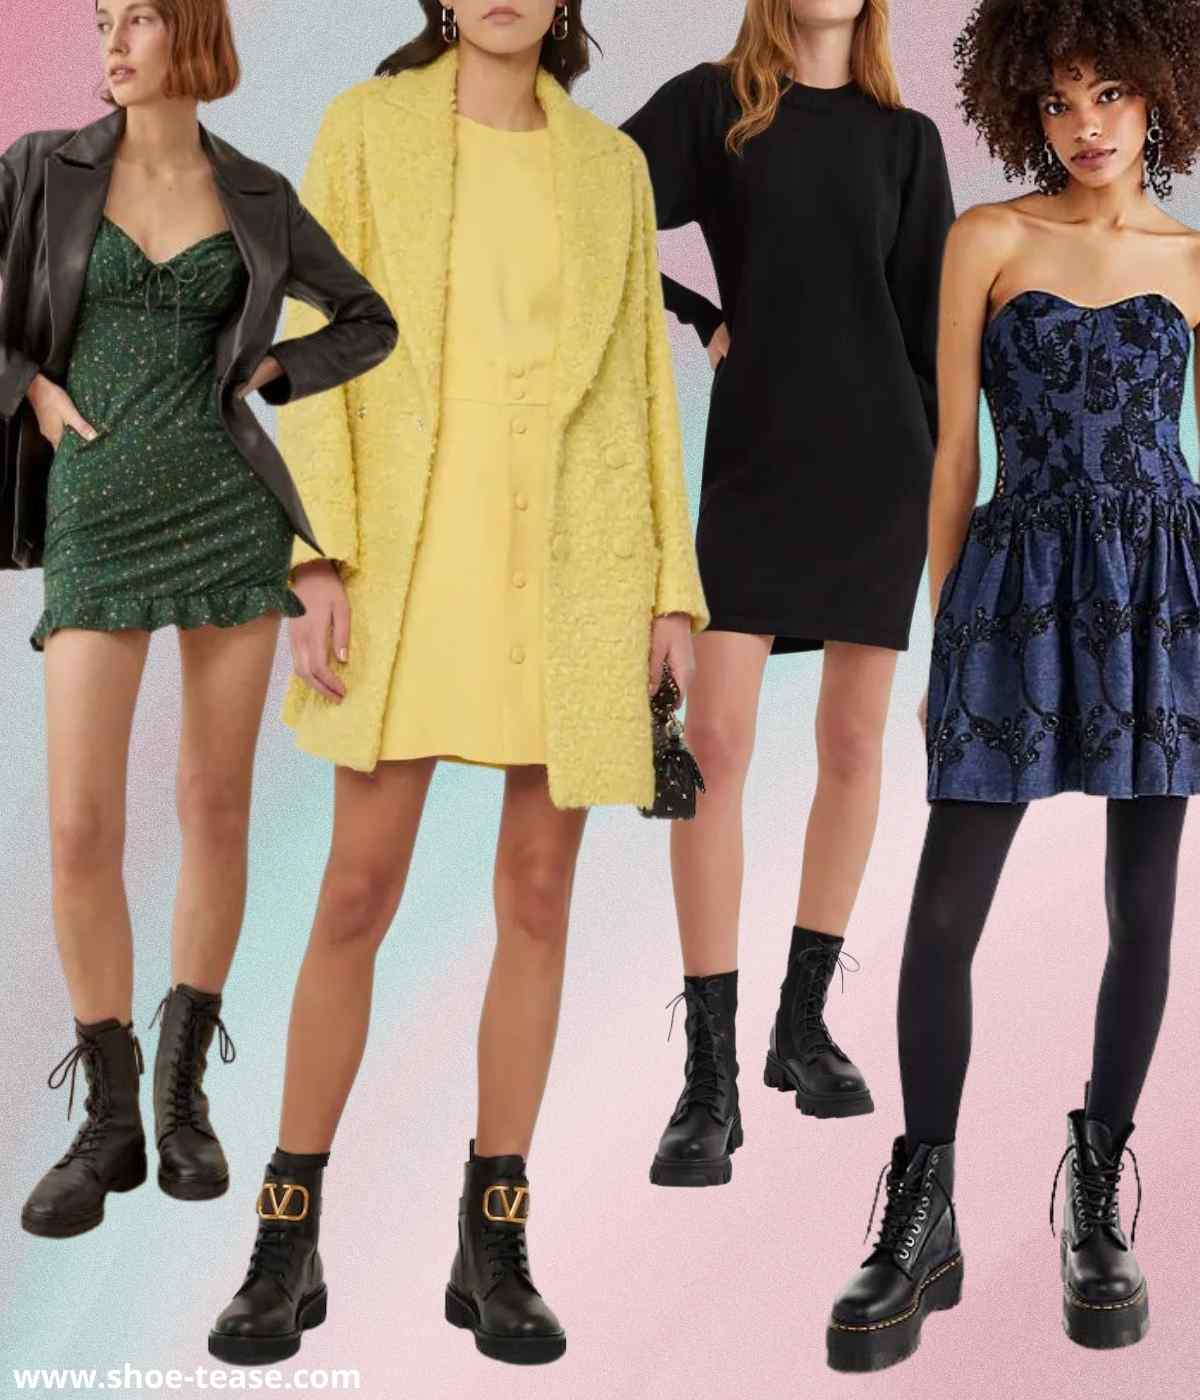 What Shoes To Wear With A Mini Dress?